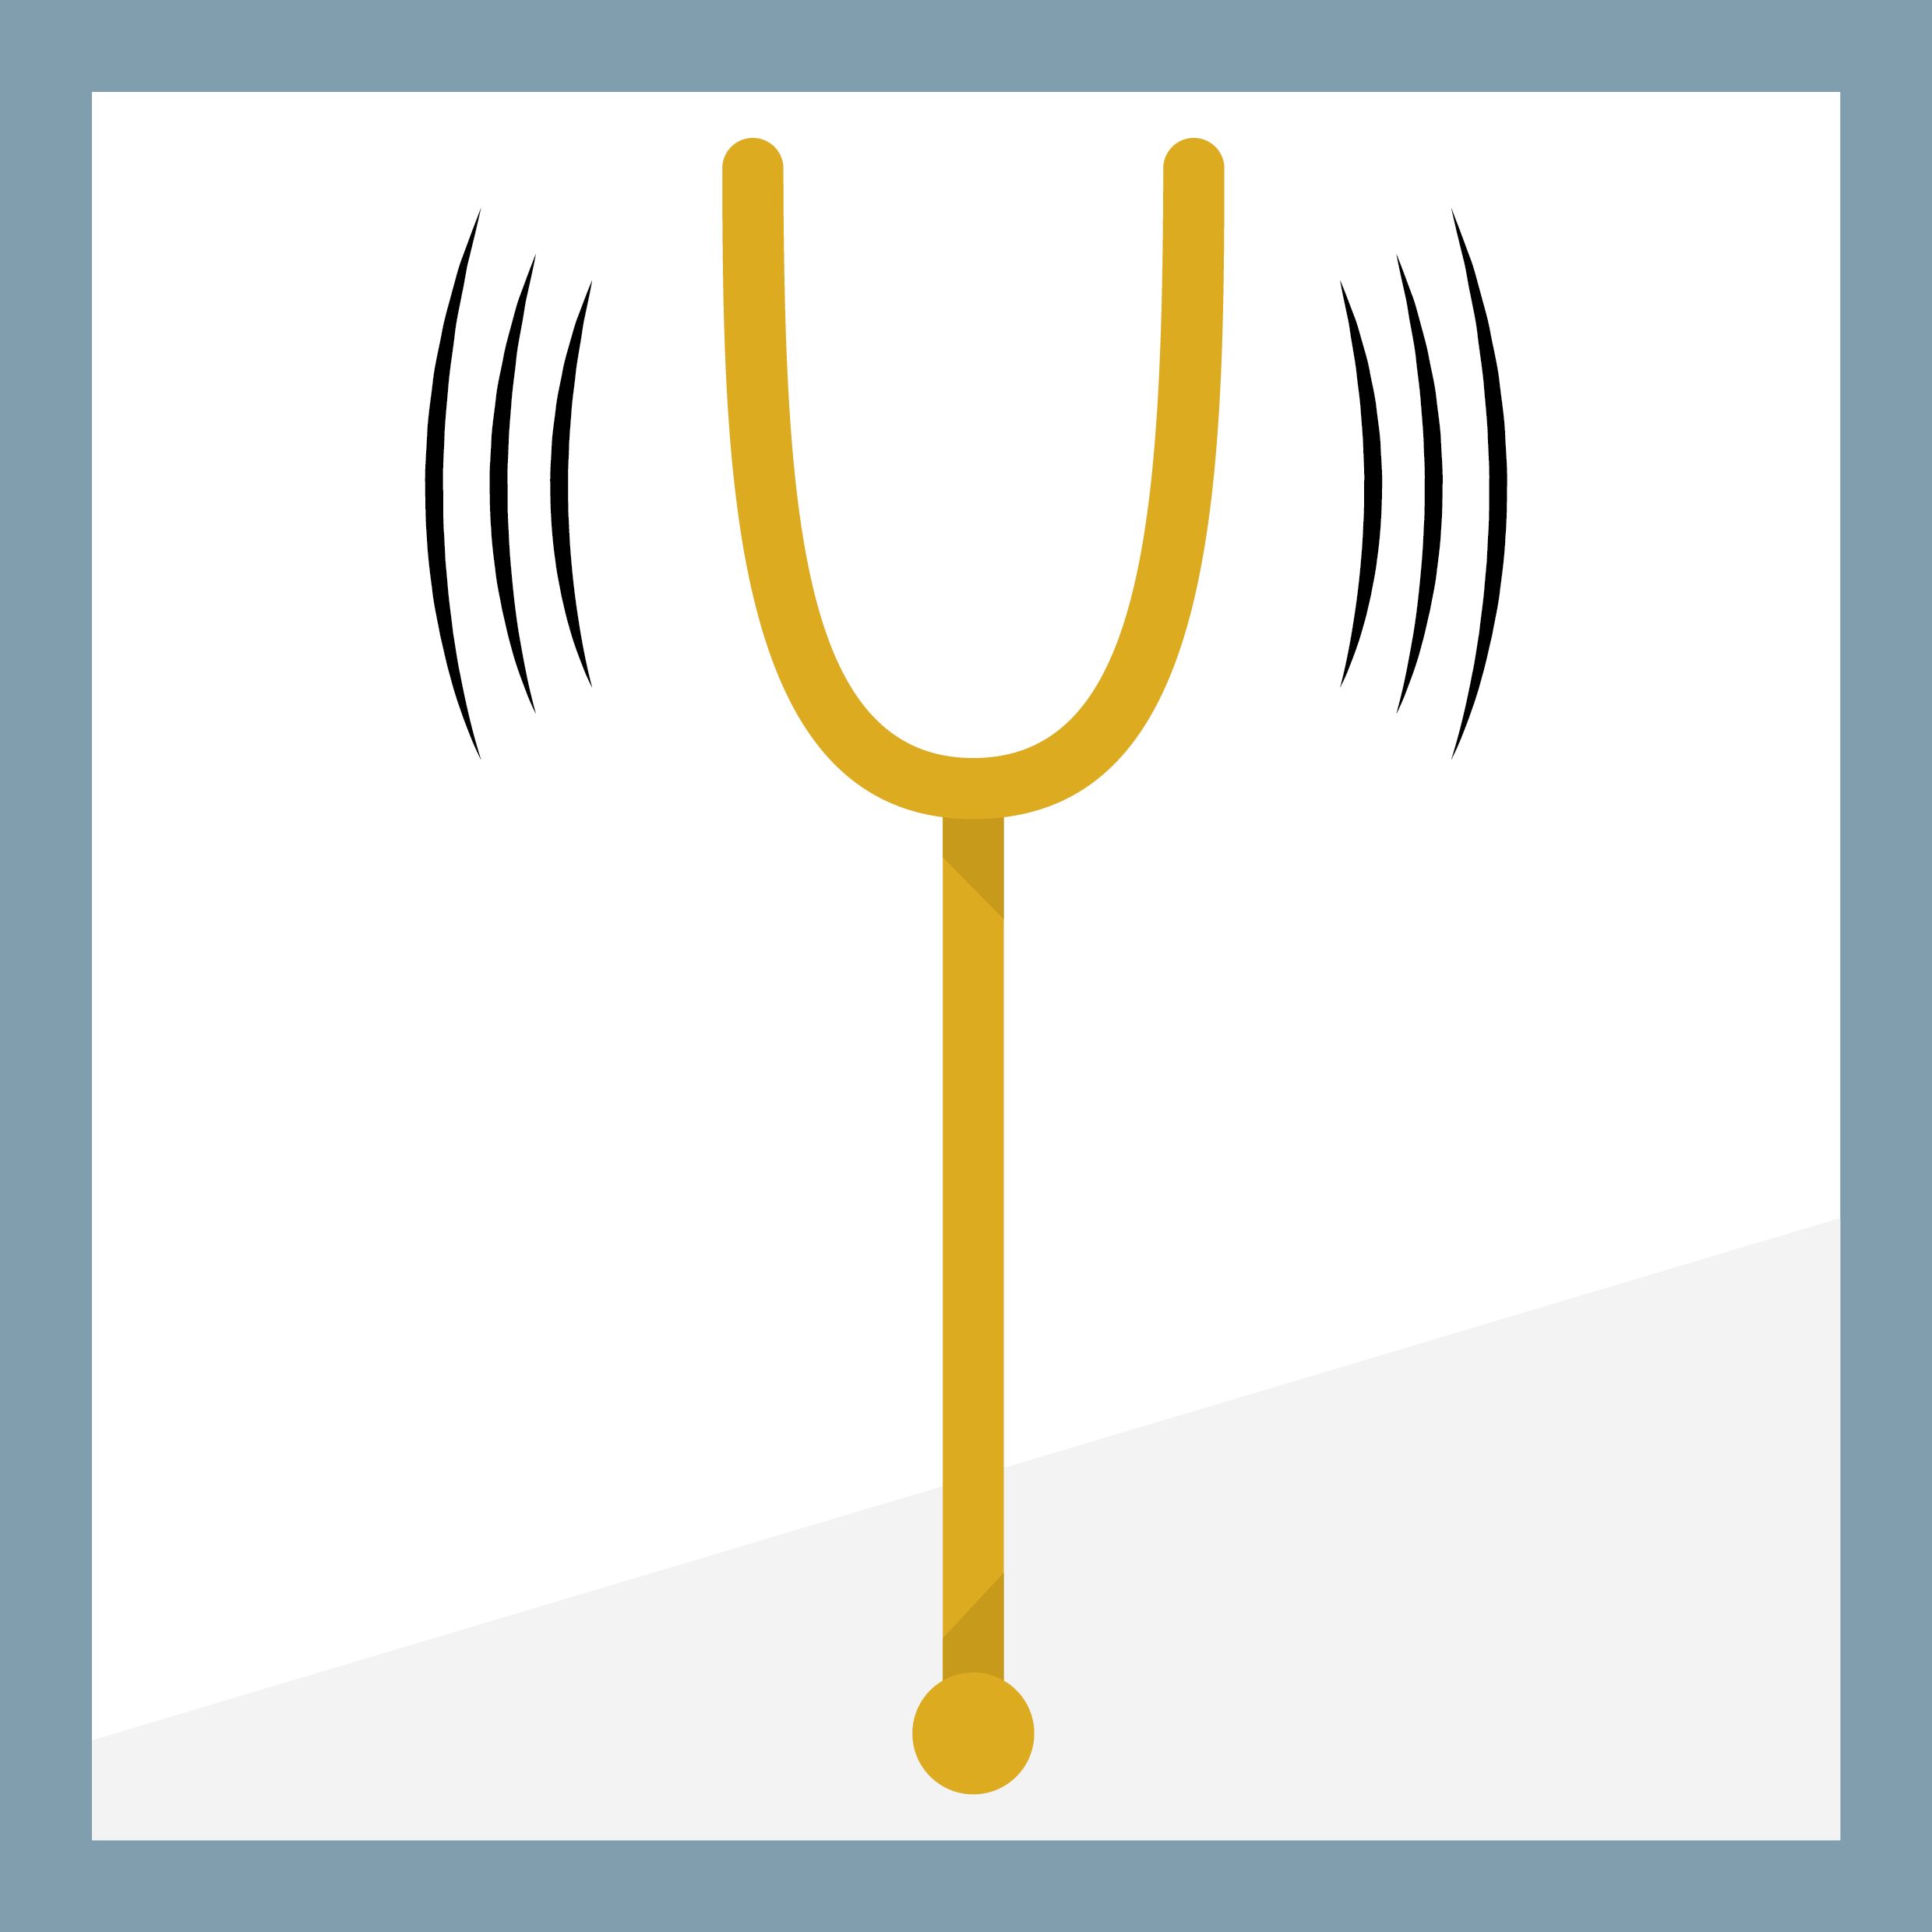 sound waves coming from a tuning fork illustration